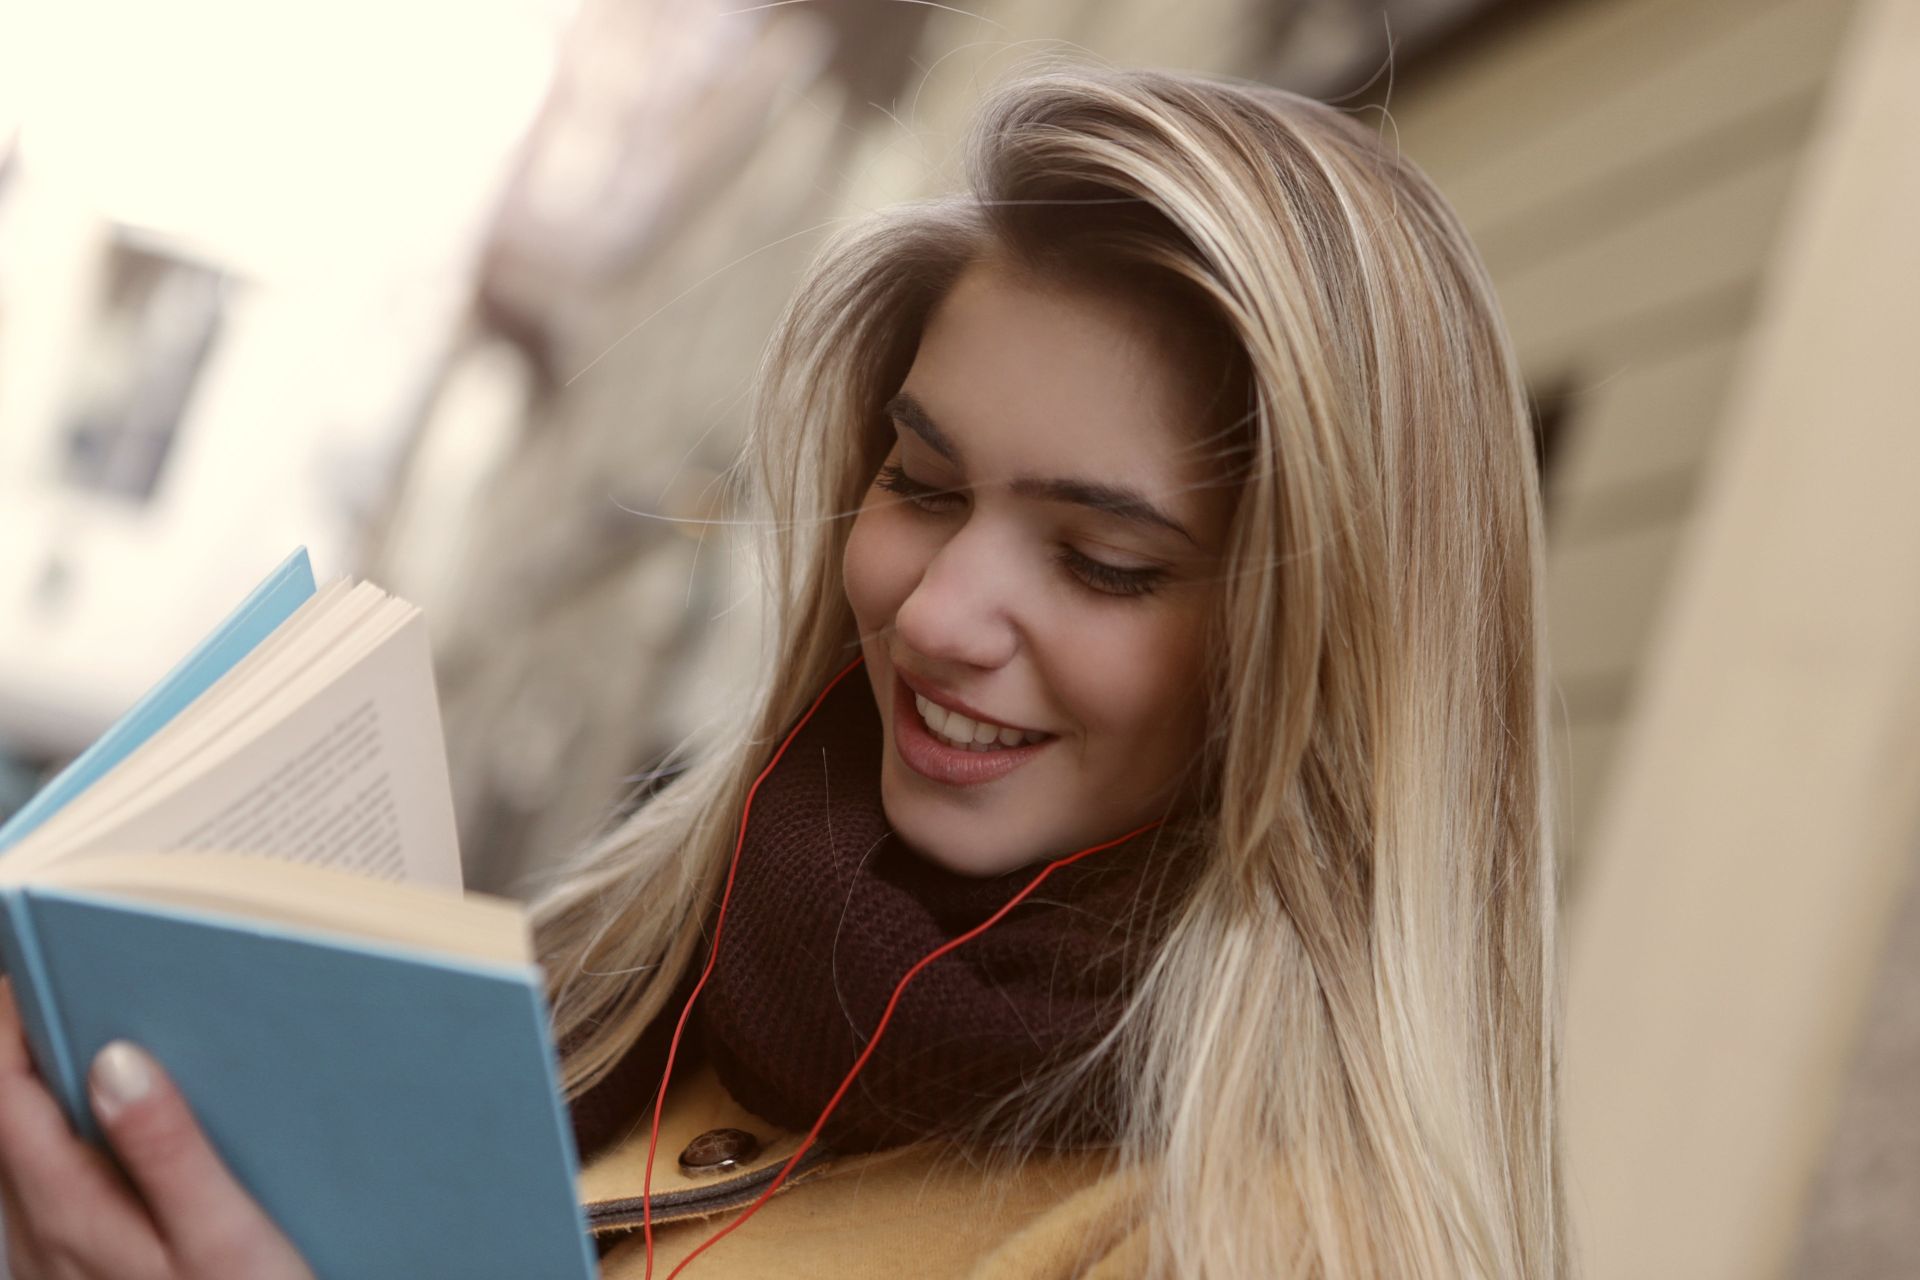 Shallow Focus Photo of Woman Smiling While Reading a Book